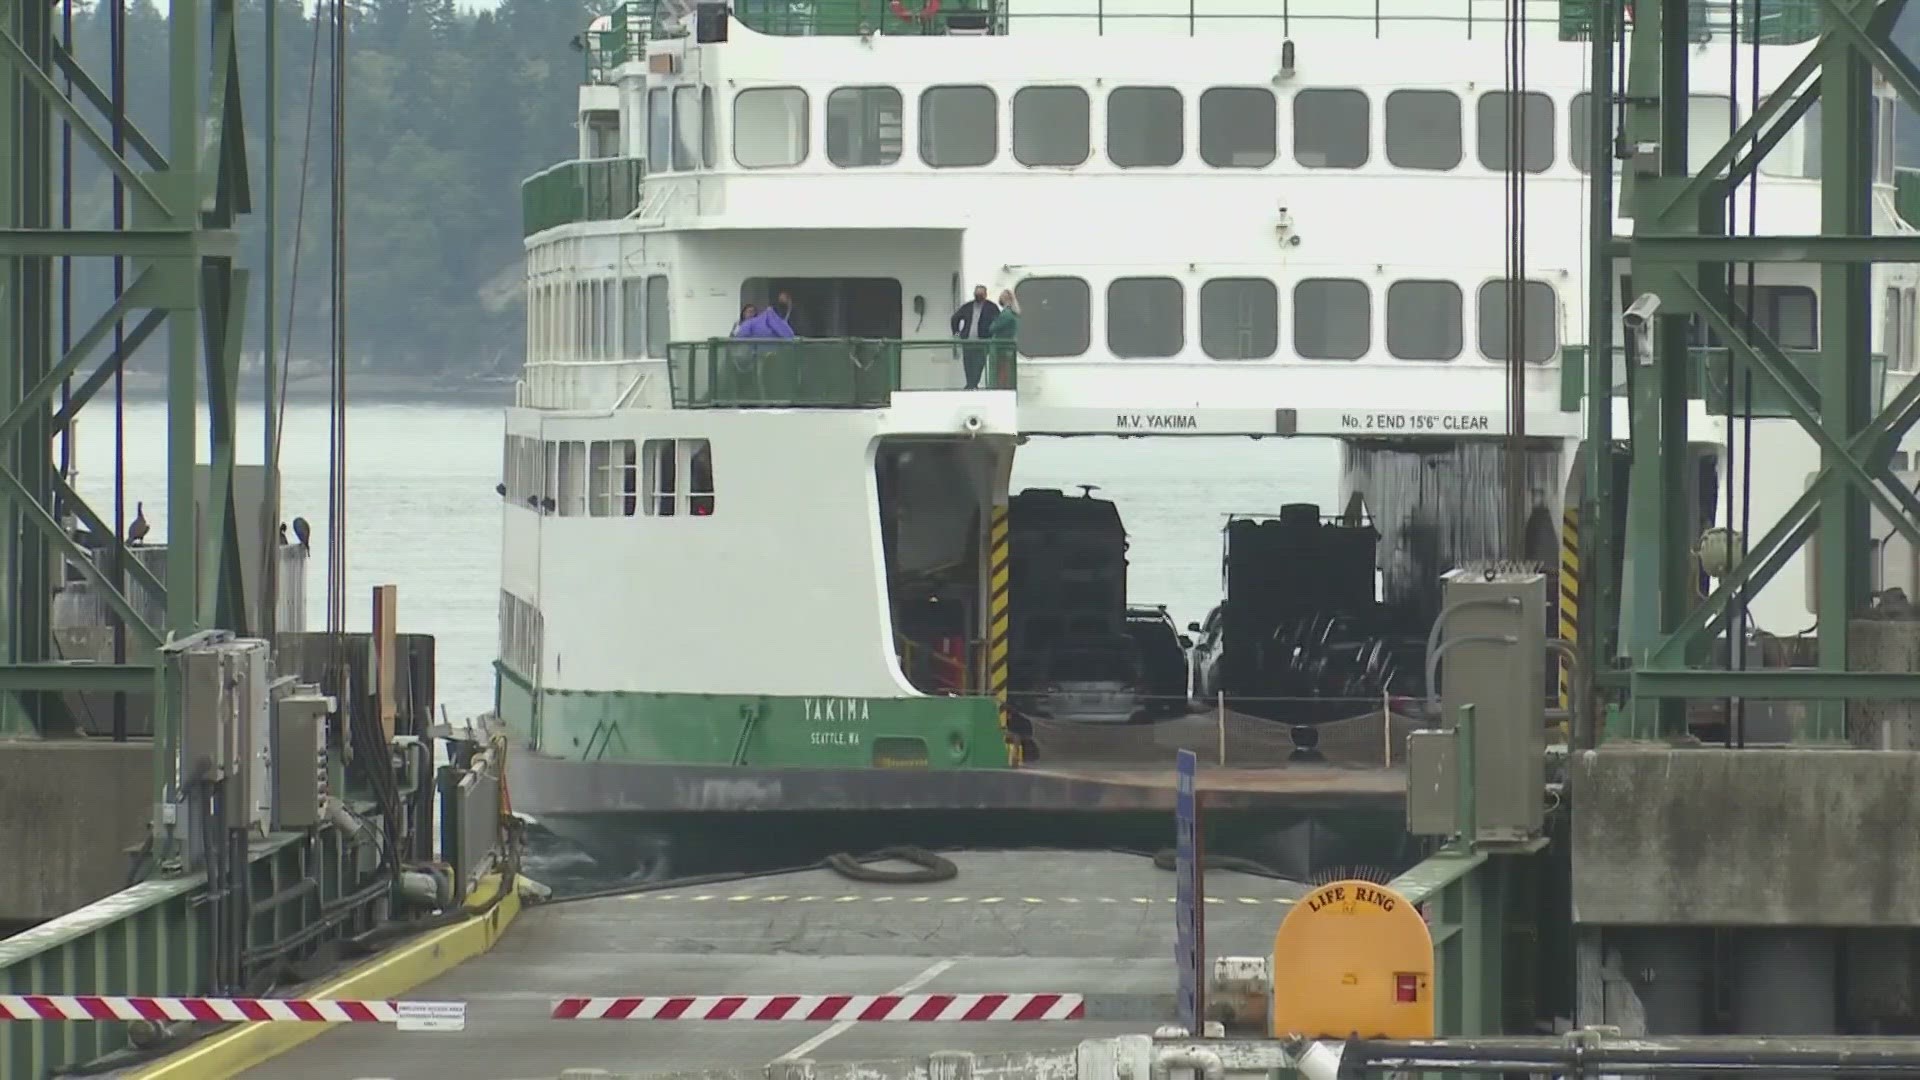 Staffing issues and an increase of holiday travelers will lead to delays in the state's ferry service for Memorial Day weekend